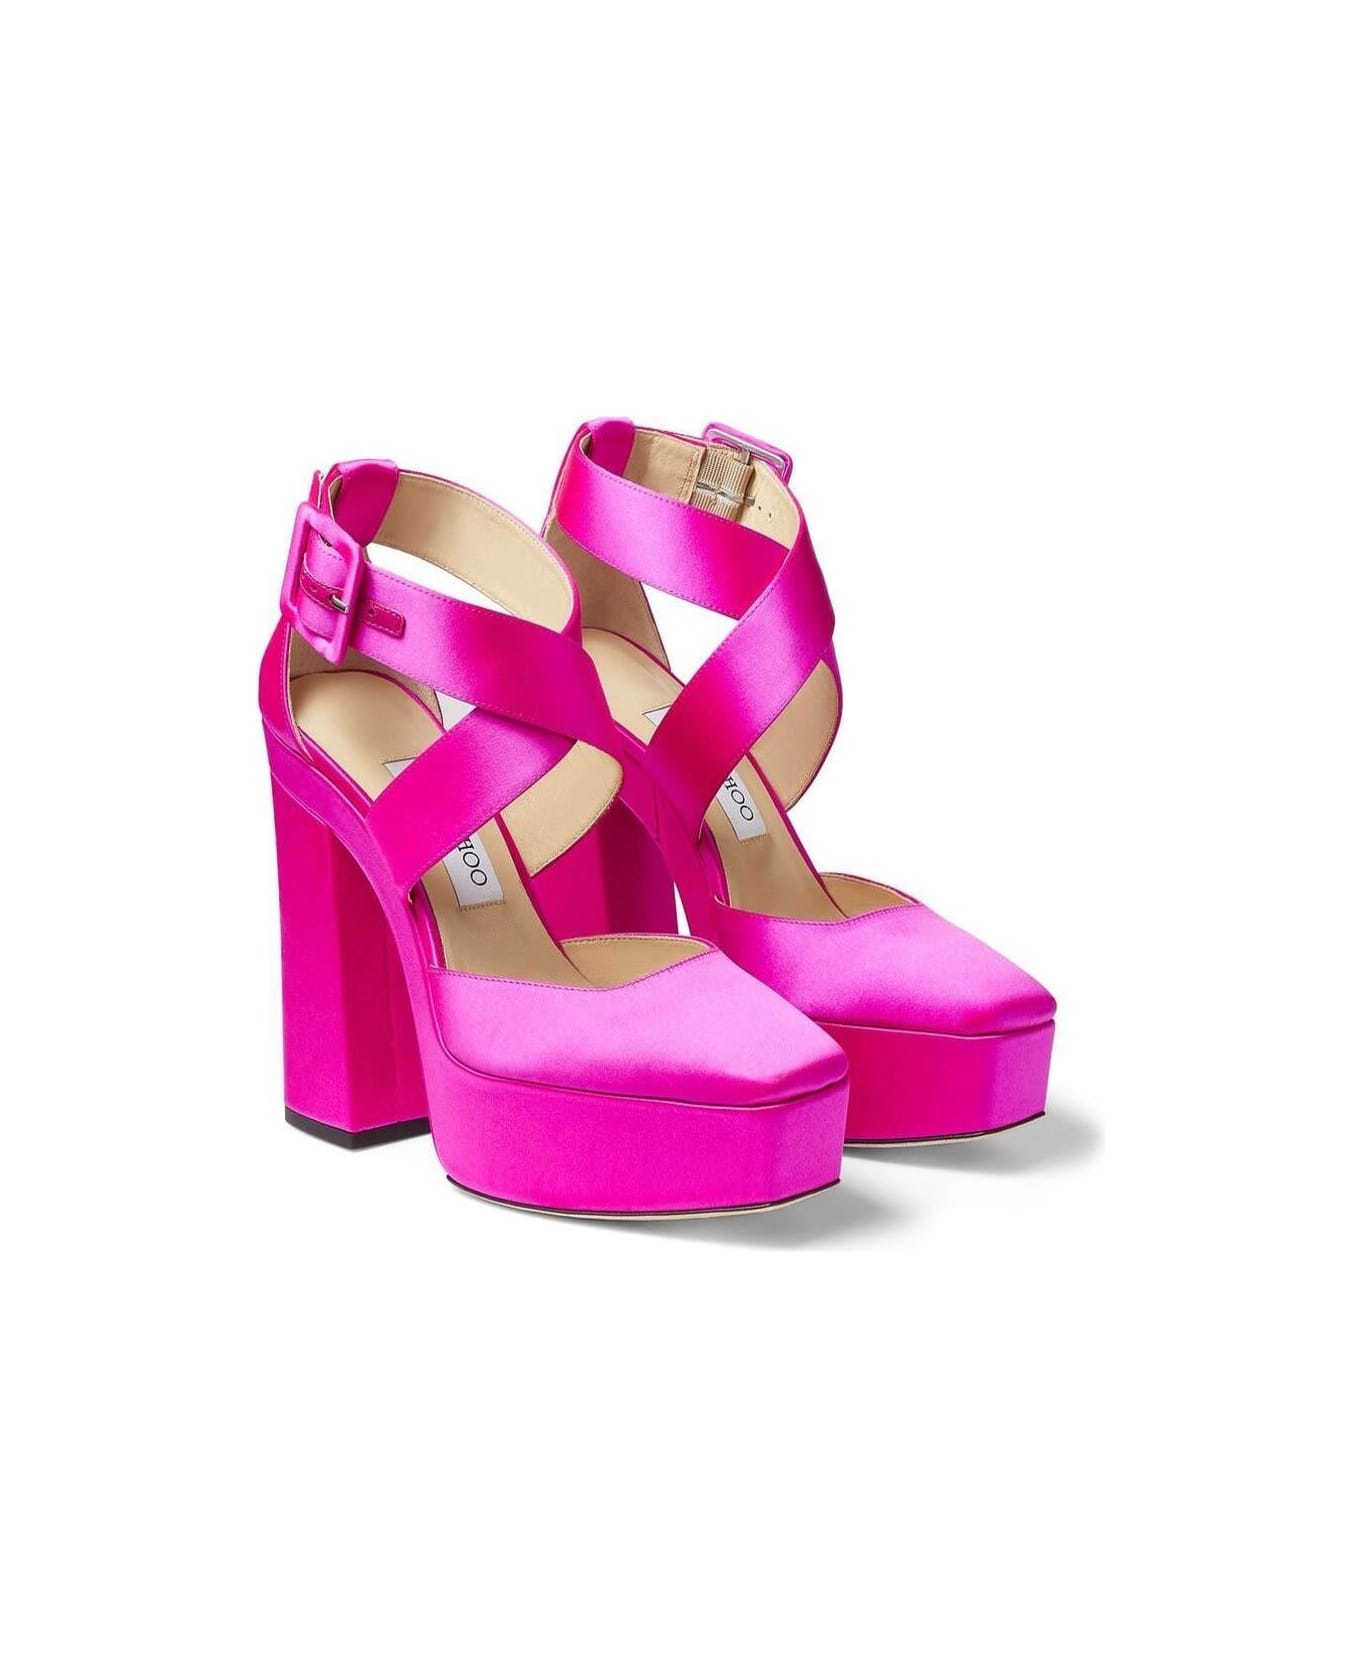 Jimmy Choo Fuchsia Pink Gian Platform Pumps In Satin And Leather Woman - Fuxia